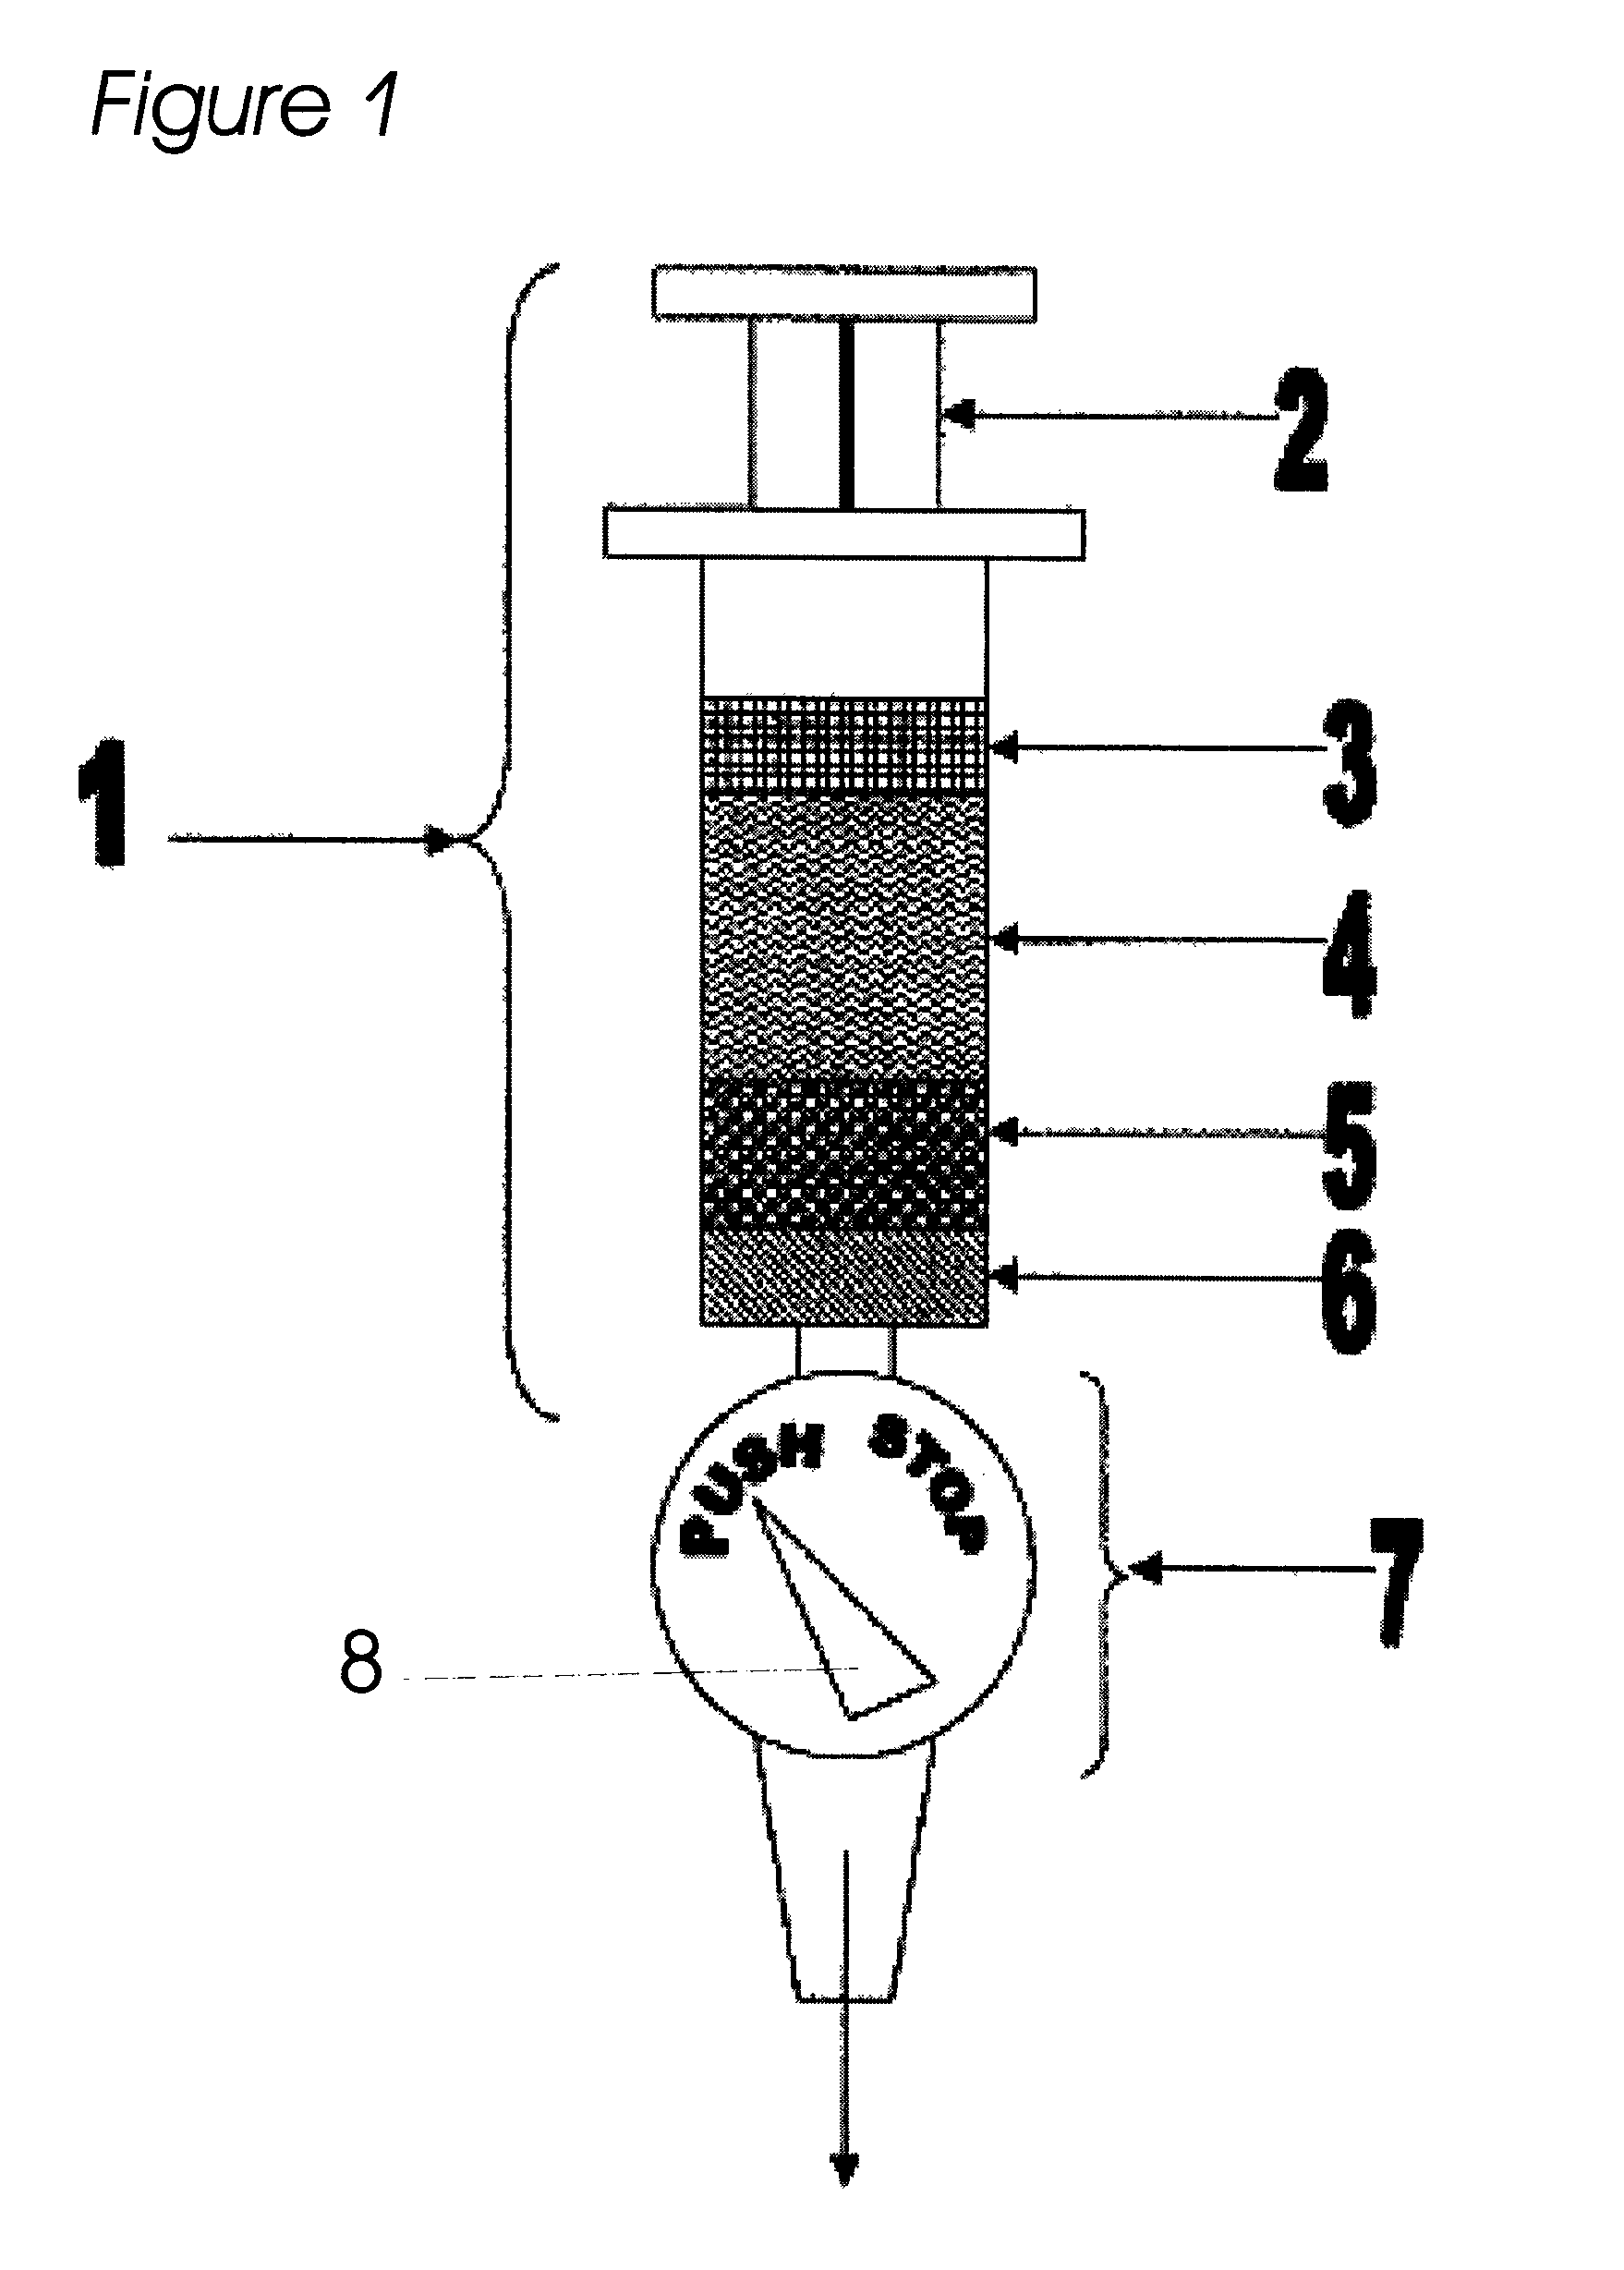 Method and apparatus for increasing adipose vascular fraction